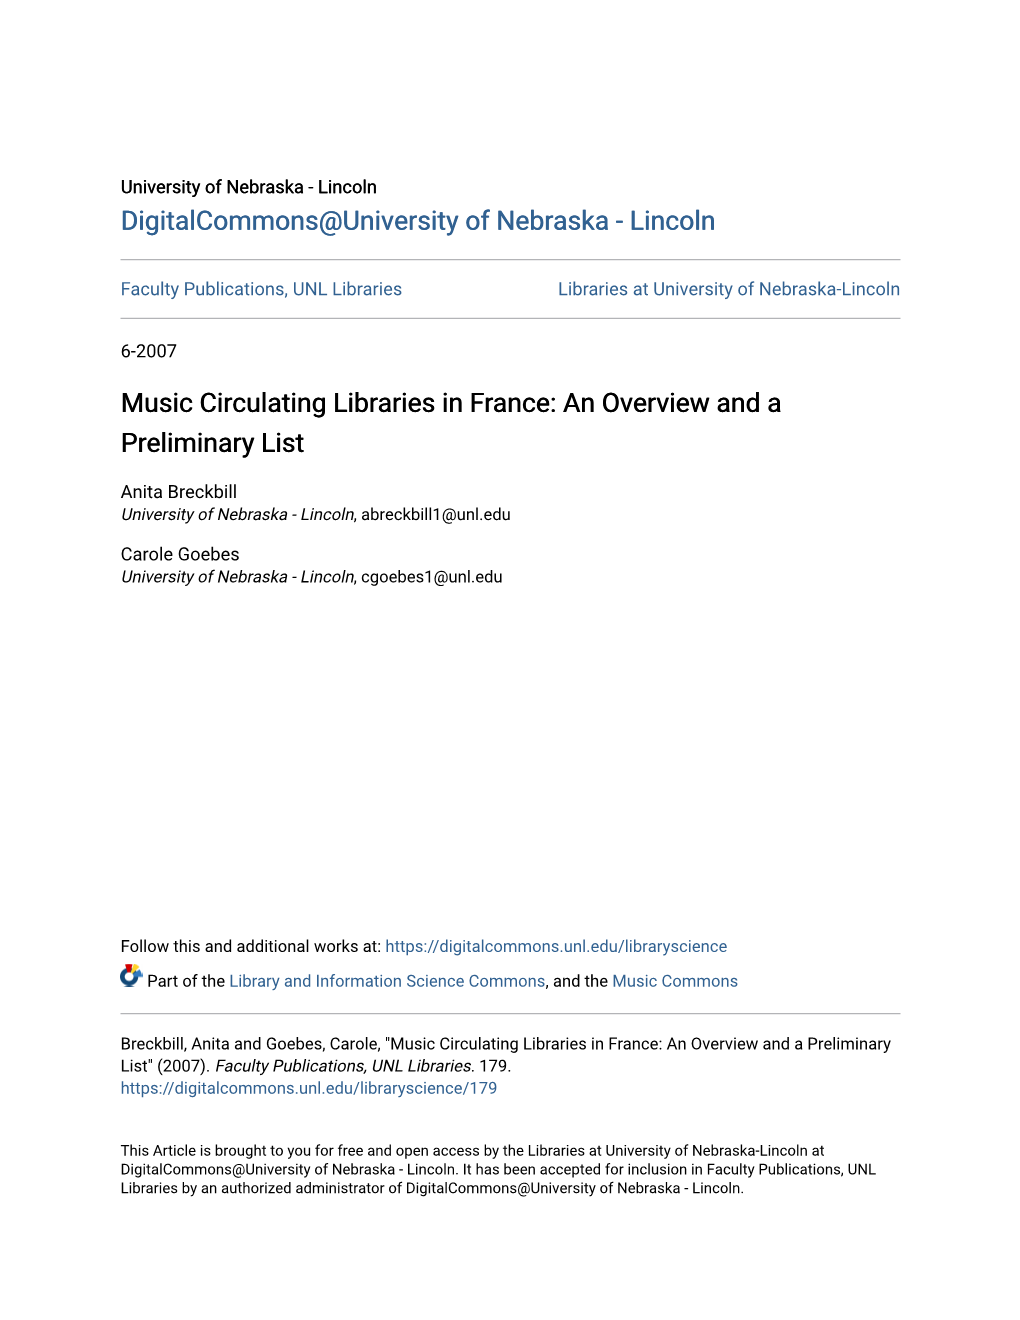 Music Circulating Libraries in France: an Overview and a Preliminary List